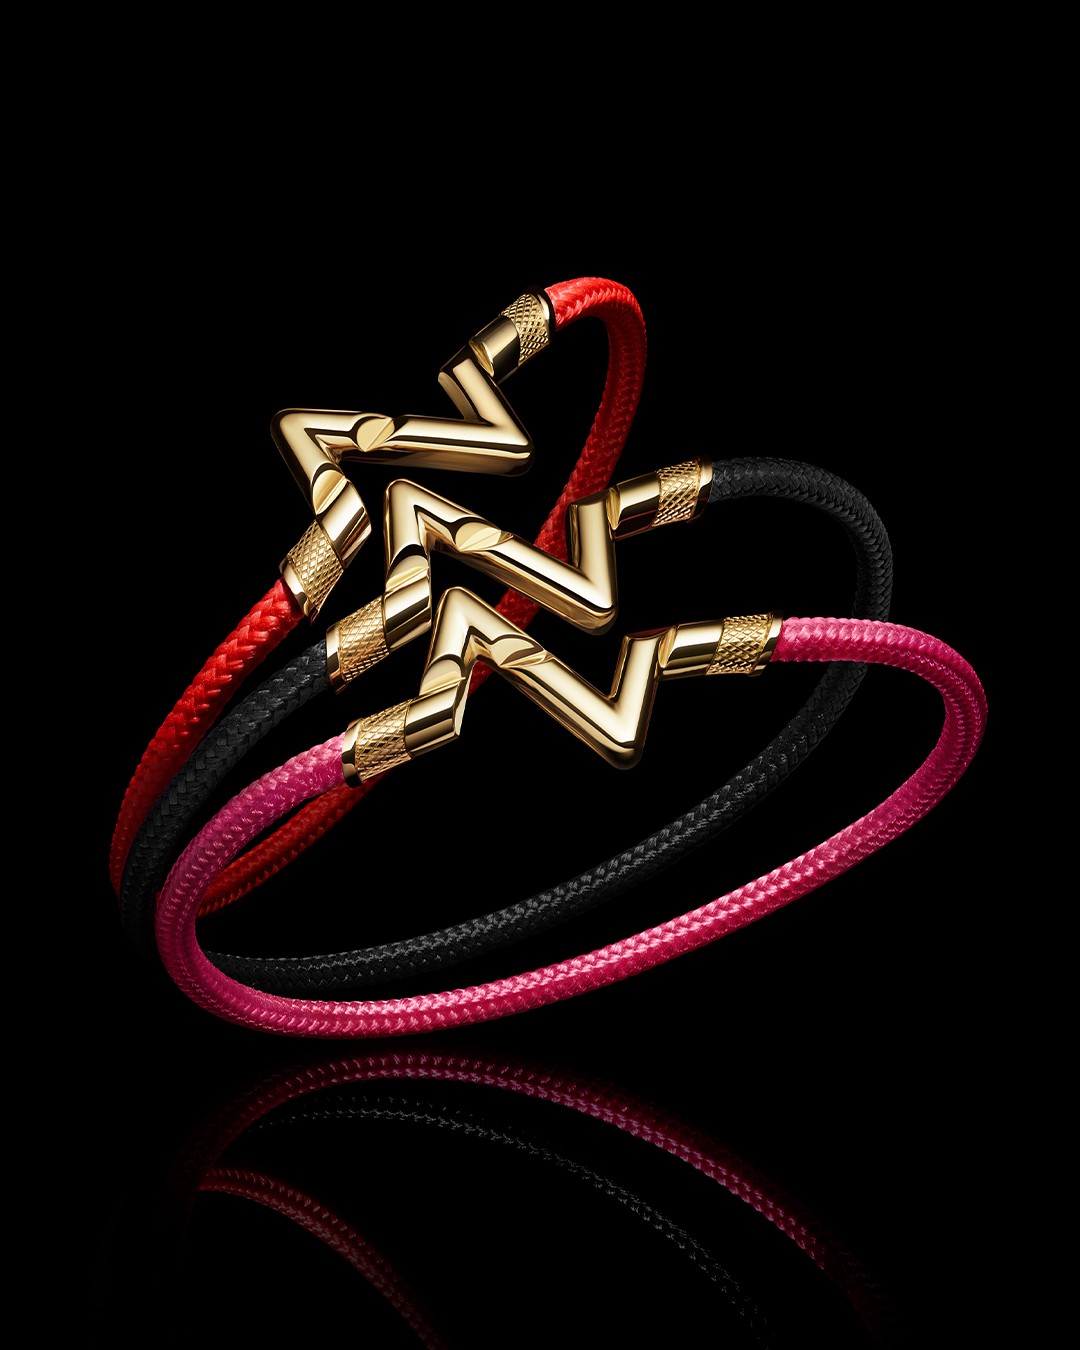 Louis Vuitton on X: Turn up the volume. #LouisVuitton's new Upside Down  Play bracelet pairs a sculptural LV clasp with a colorful array of  interchangeable cords inspired by those found in the